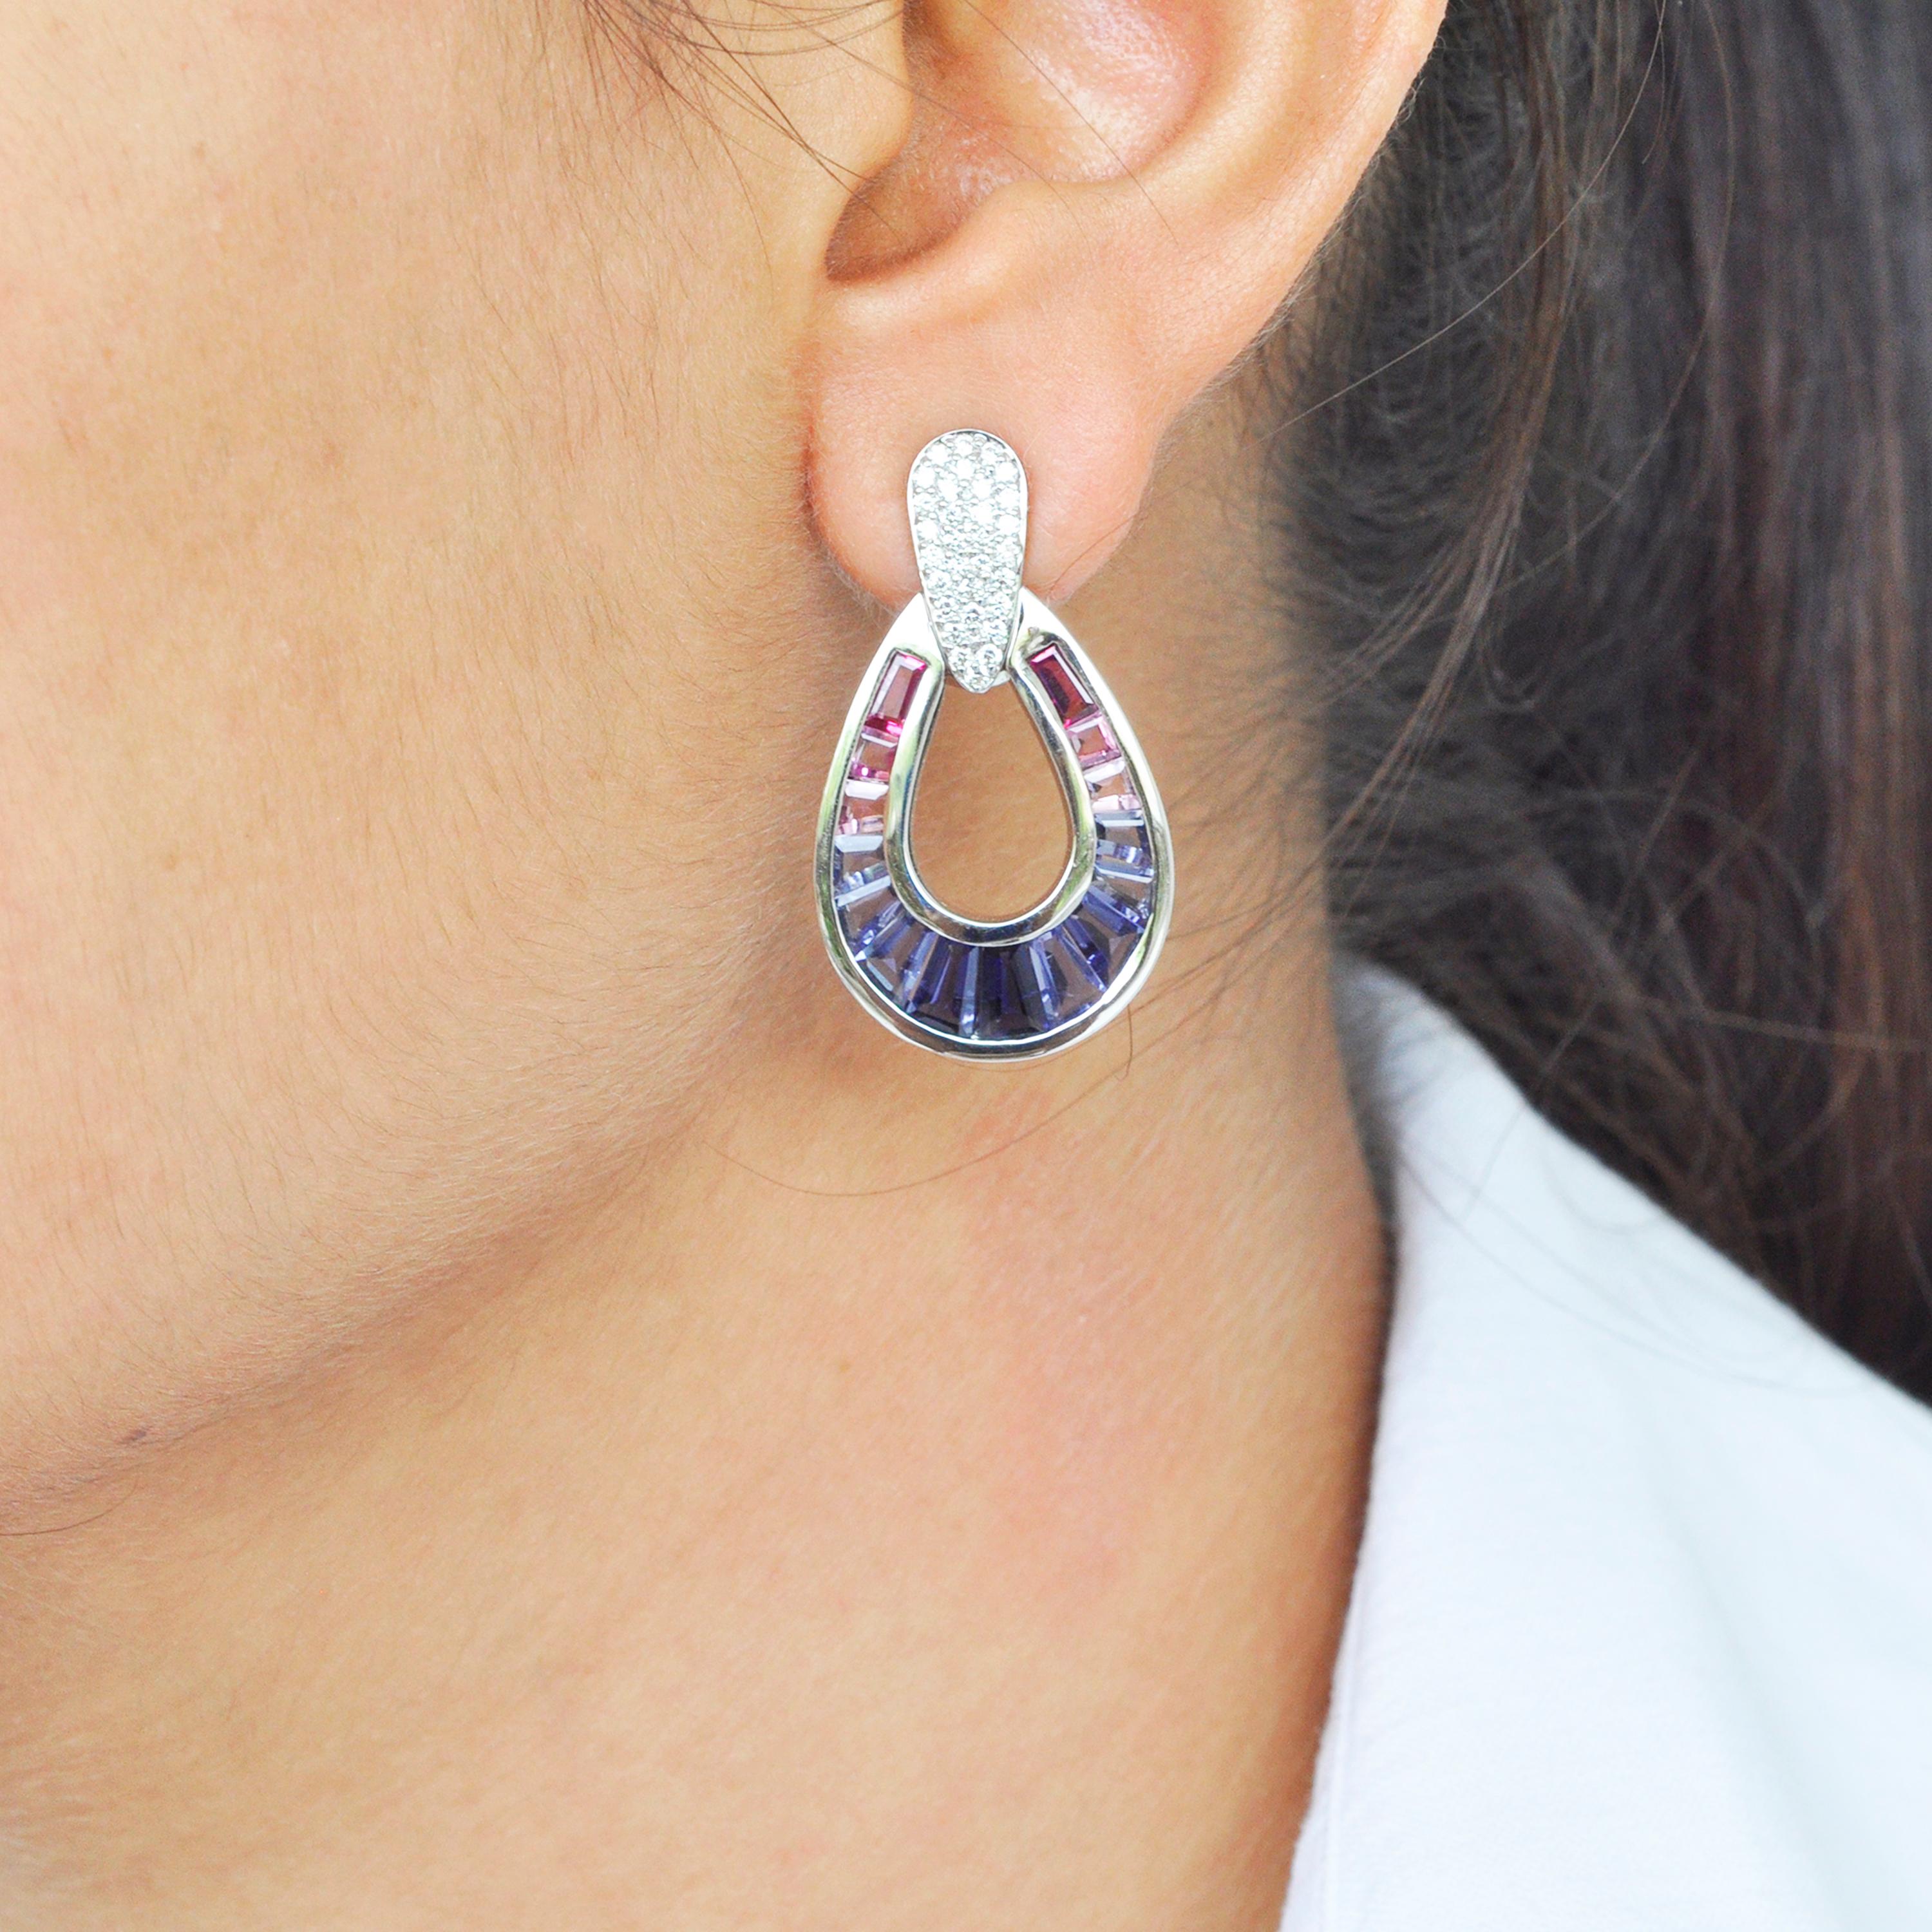 18 karat white gold natural iolite pink tourmaline taper baguette diamond dangle earrings.

Art, color and culture all come together to inspire this 18 karat white gold taper baguette iolite pink tourmaline diamond dangling teardrop earrings. The